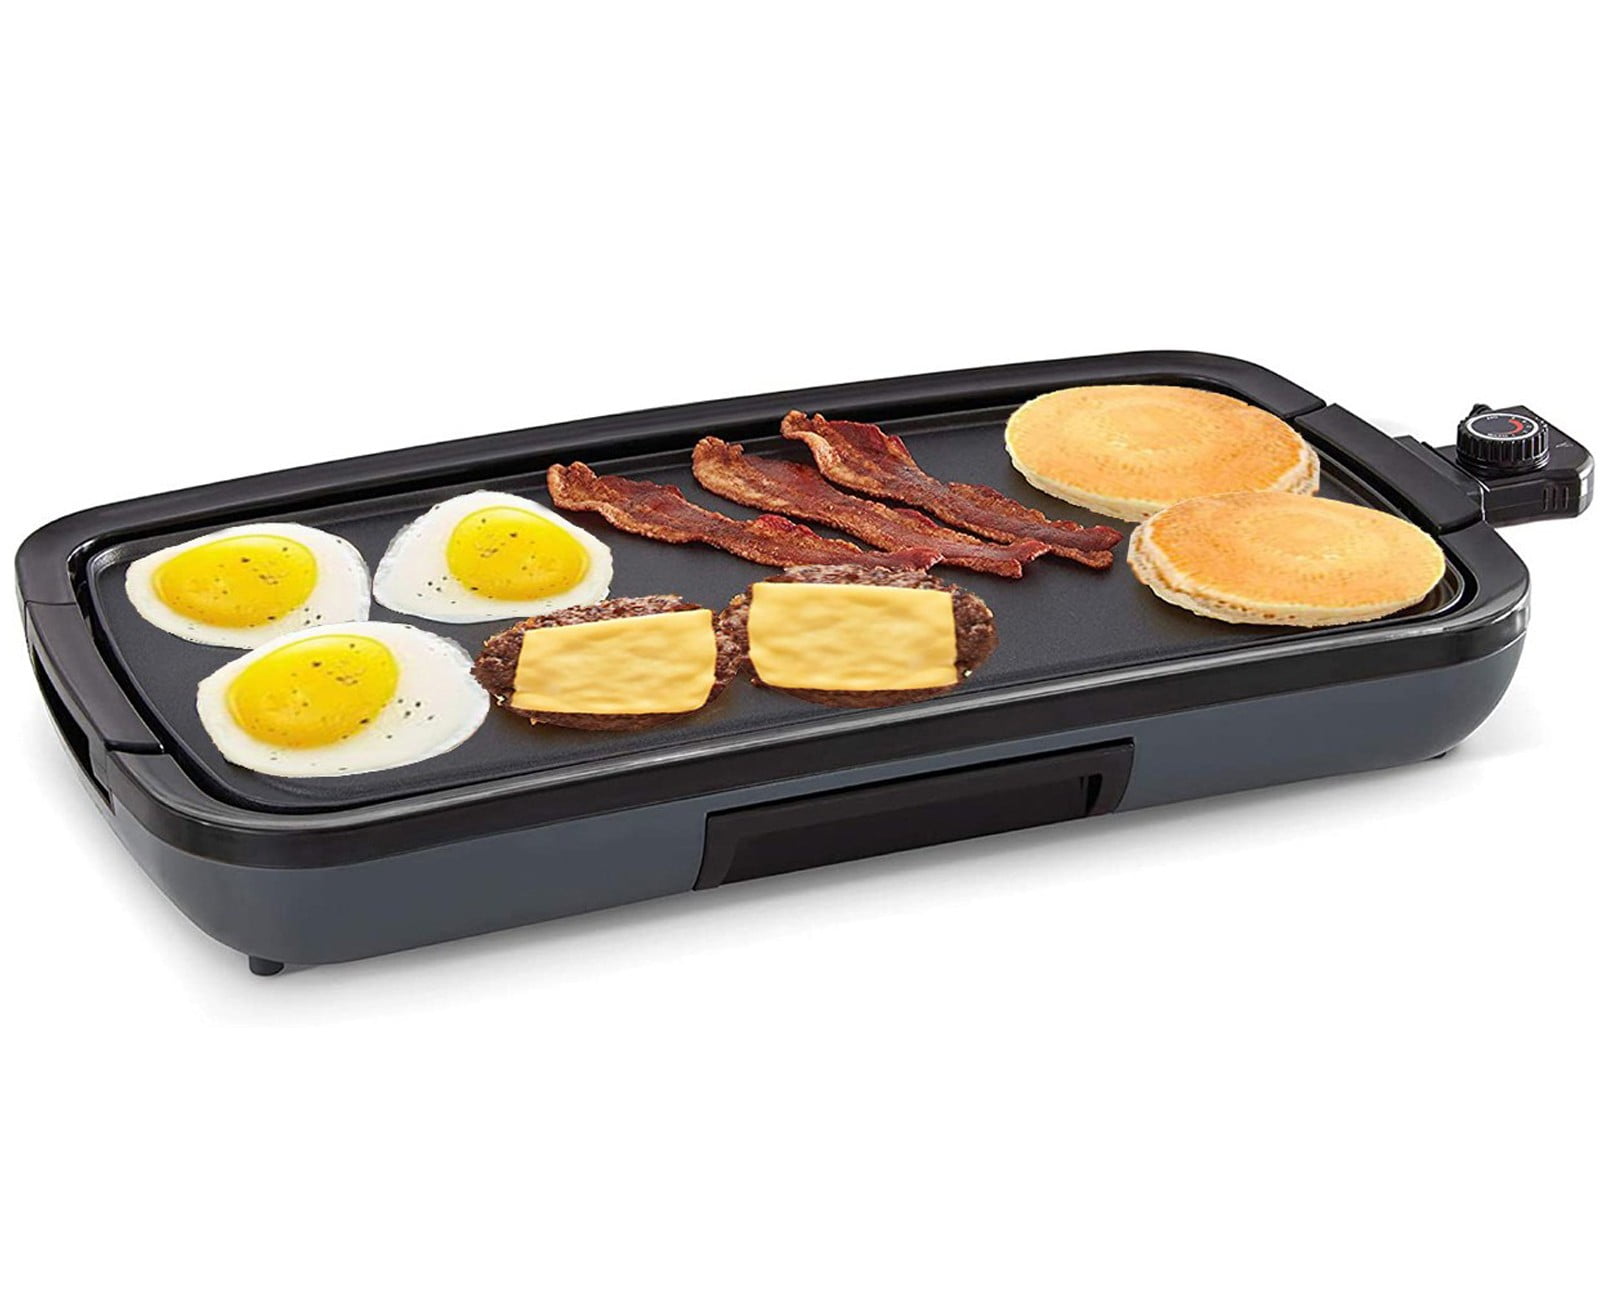  Maconee 10inch Round Metal Crisper Pan, Gray, Non-stick and  Dishwasher Safe, Great for Bacon, Scram Eggs, Reheating Pizza, Fries,  Frozen Hamburger Patties and more : MACONEE: Home & Kitchen